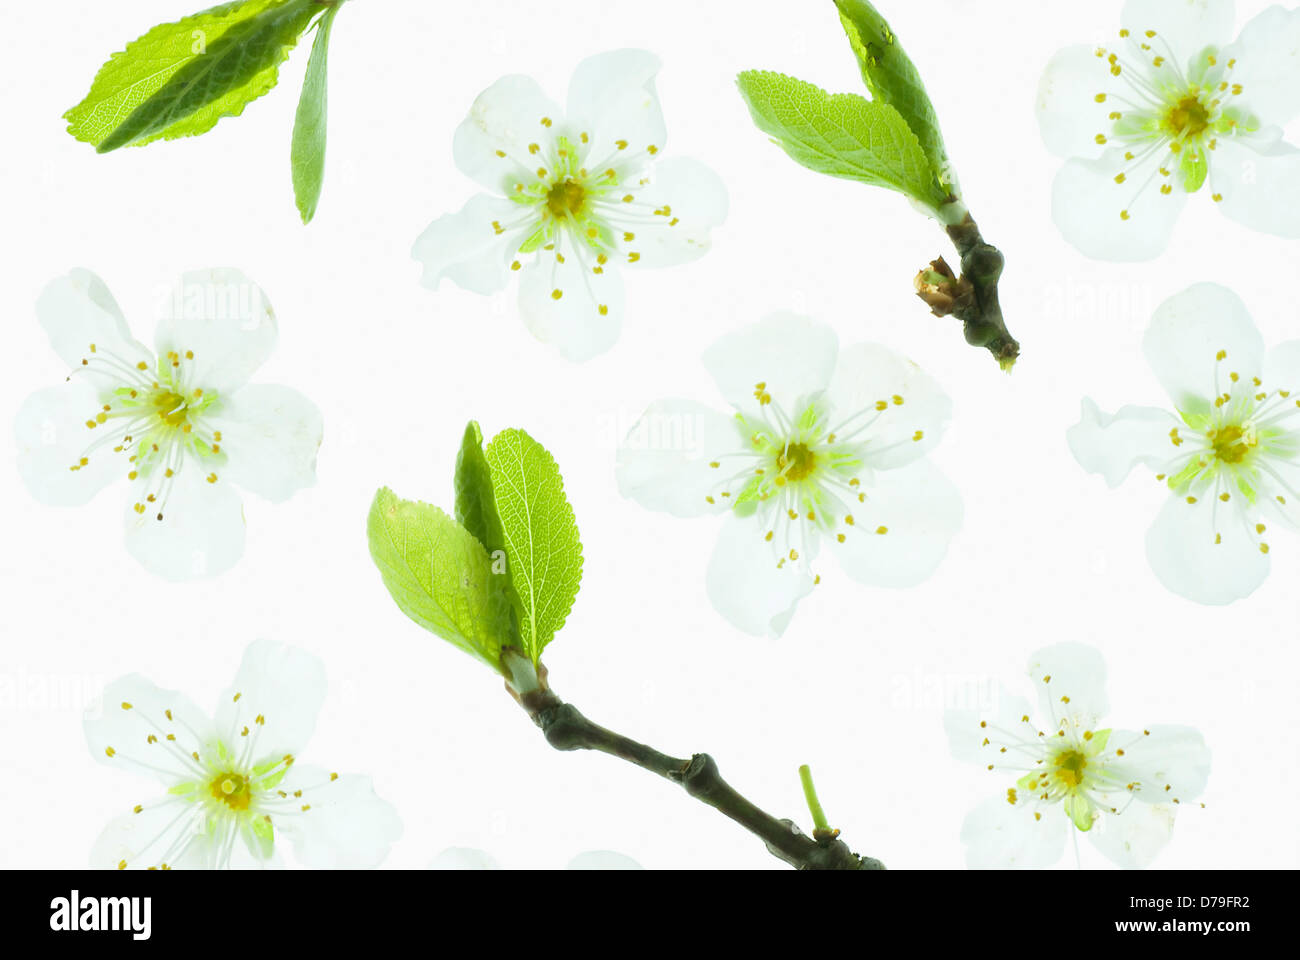 Prunus cerasifera, Single flower heads and leaves arranged to cover the frame. Stock Photo